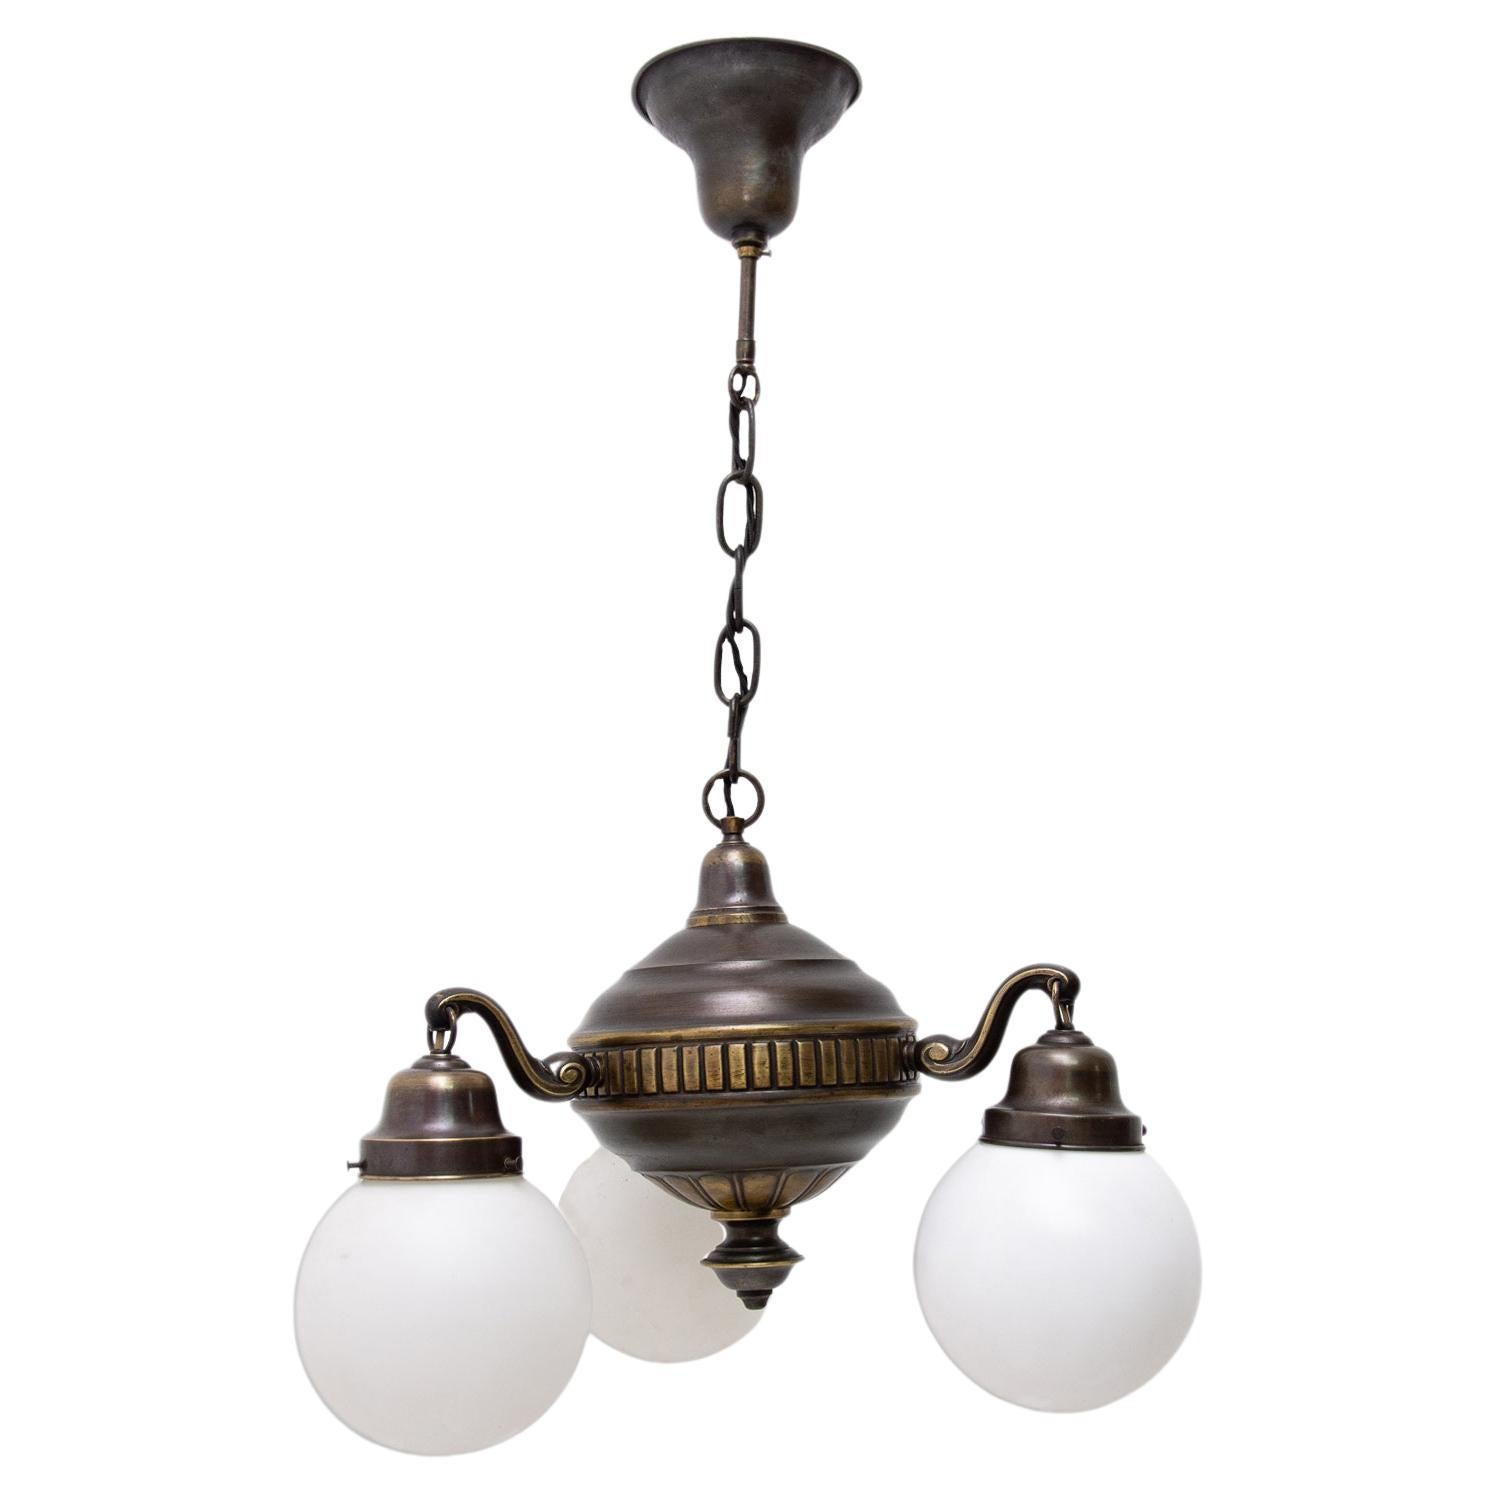 Historicizing Brass Three-Armed Chandelier, Turn of the 19th and 20th Century